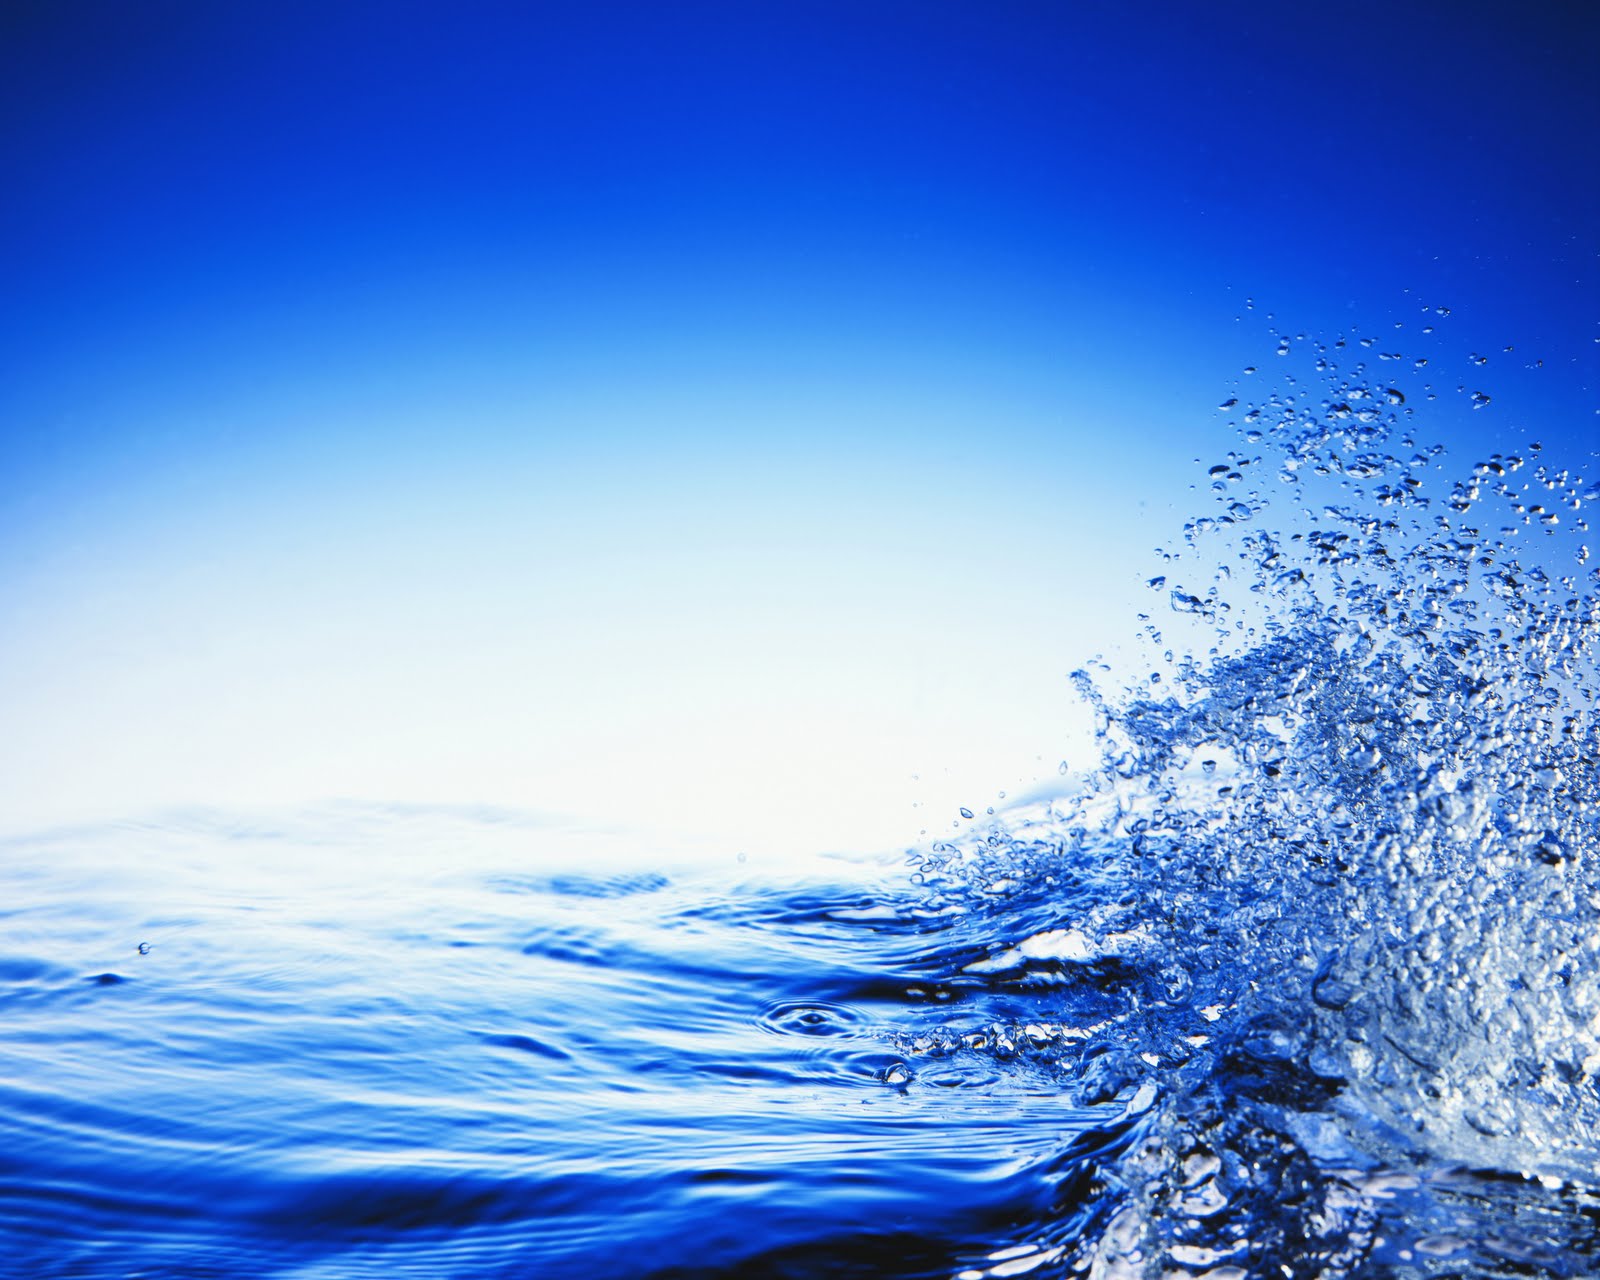 Exclusive royalty free wallpapers of Water | Wallpaper Hd ...